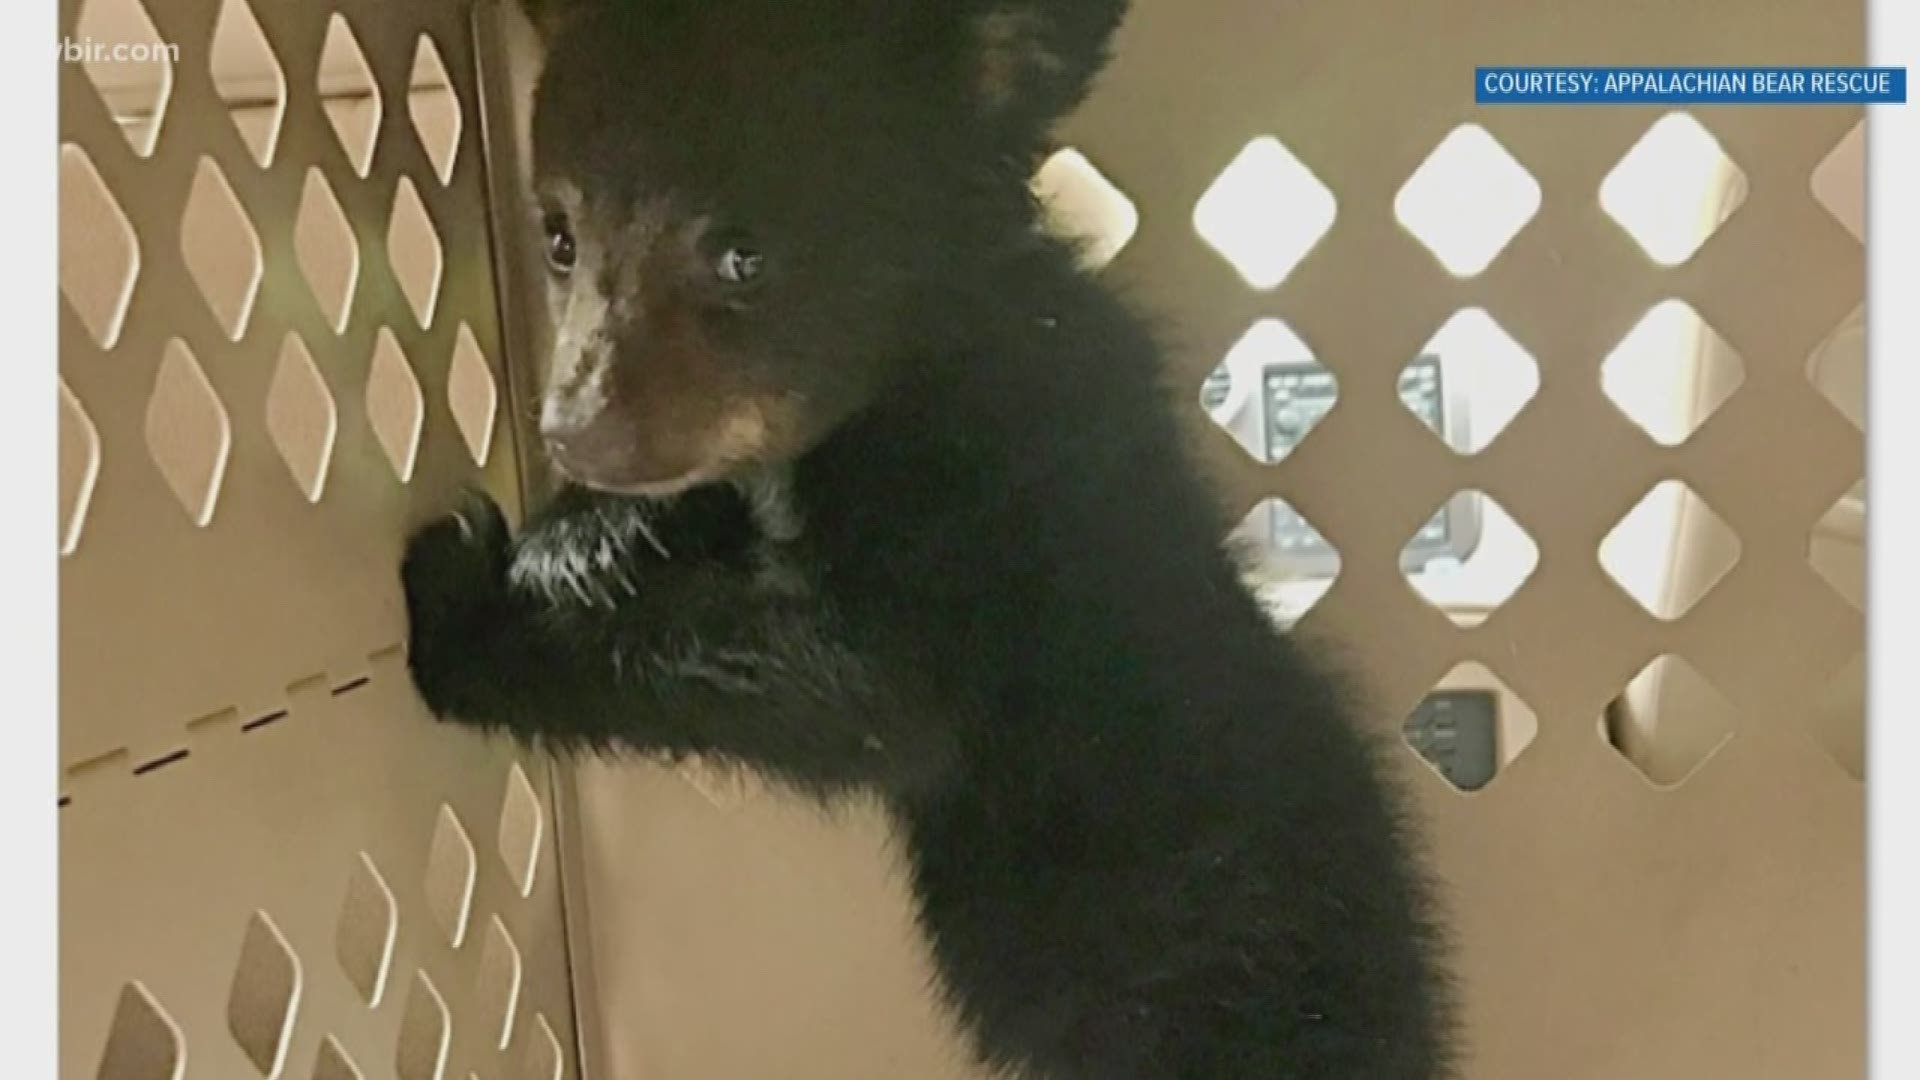 Appalachian Bear Rescue has its paws full this season. The rescue took in two 4-month-old cubs this week -- Dandelion and Bentley bear.  Add that to the 5 others it's caring for already .... and you get 7 "four-month-old" balls of energy. It's also caring for 3 yearlings. 10 bears at once!